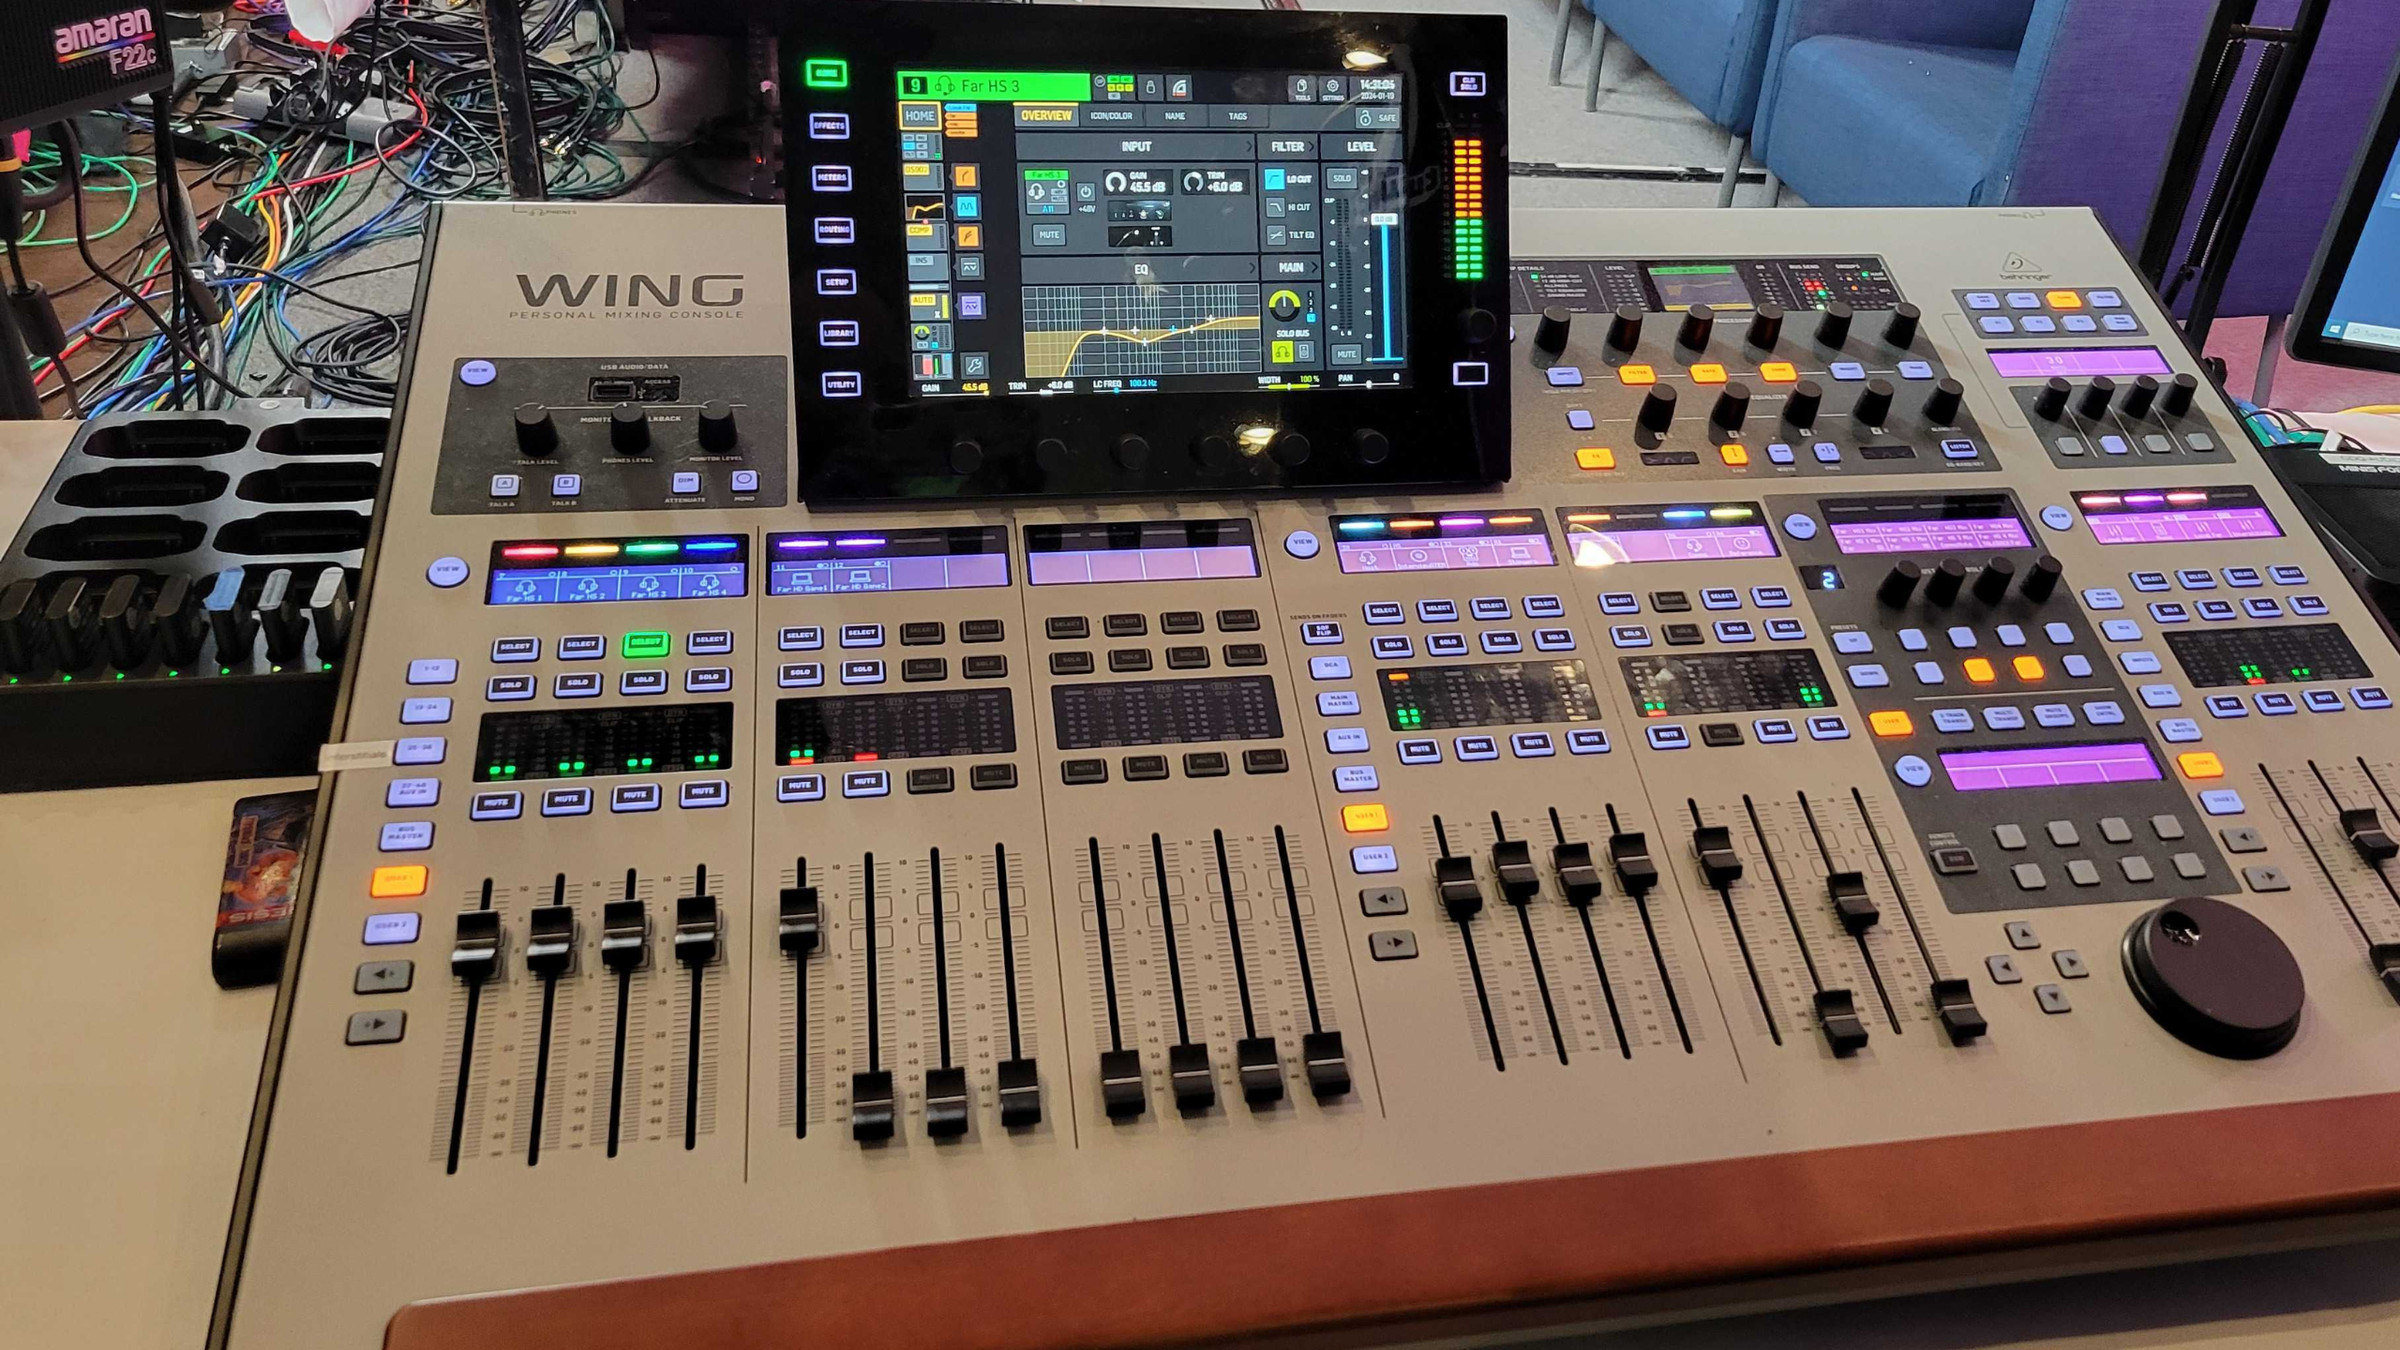 Photo of the Wing, a 48-channel digital audio mixer